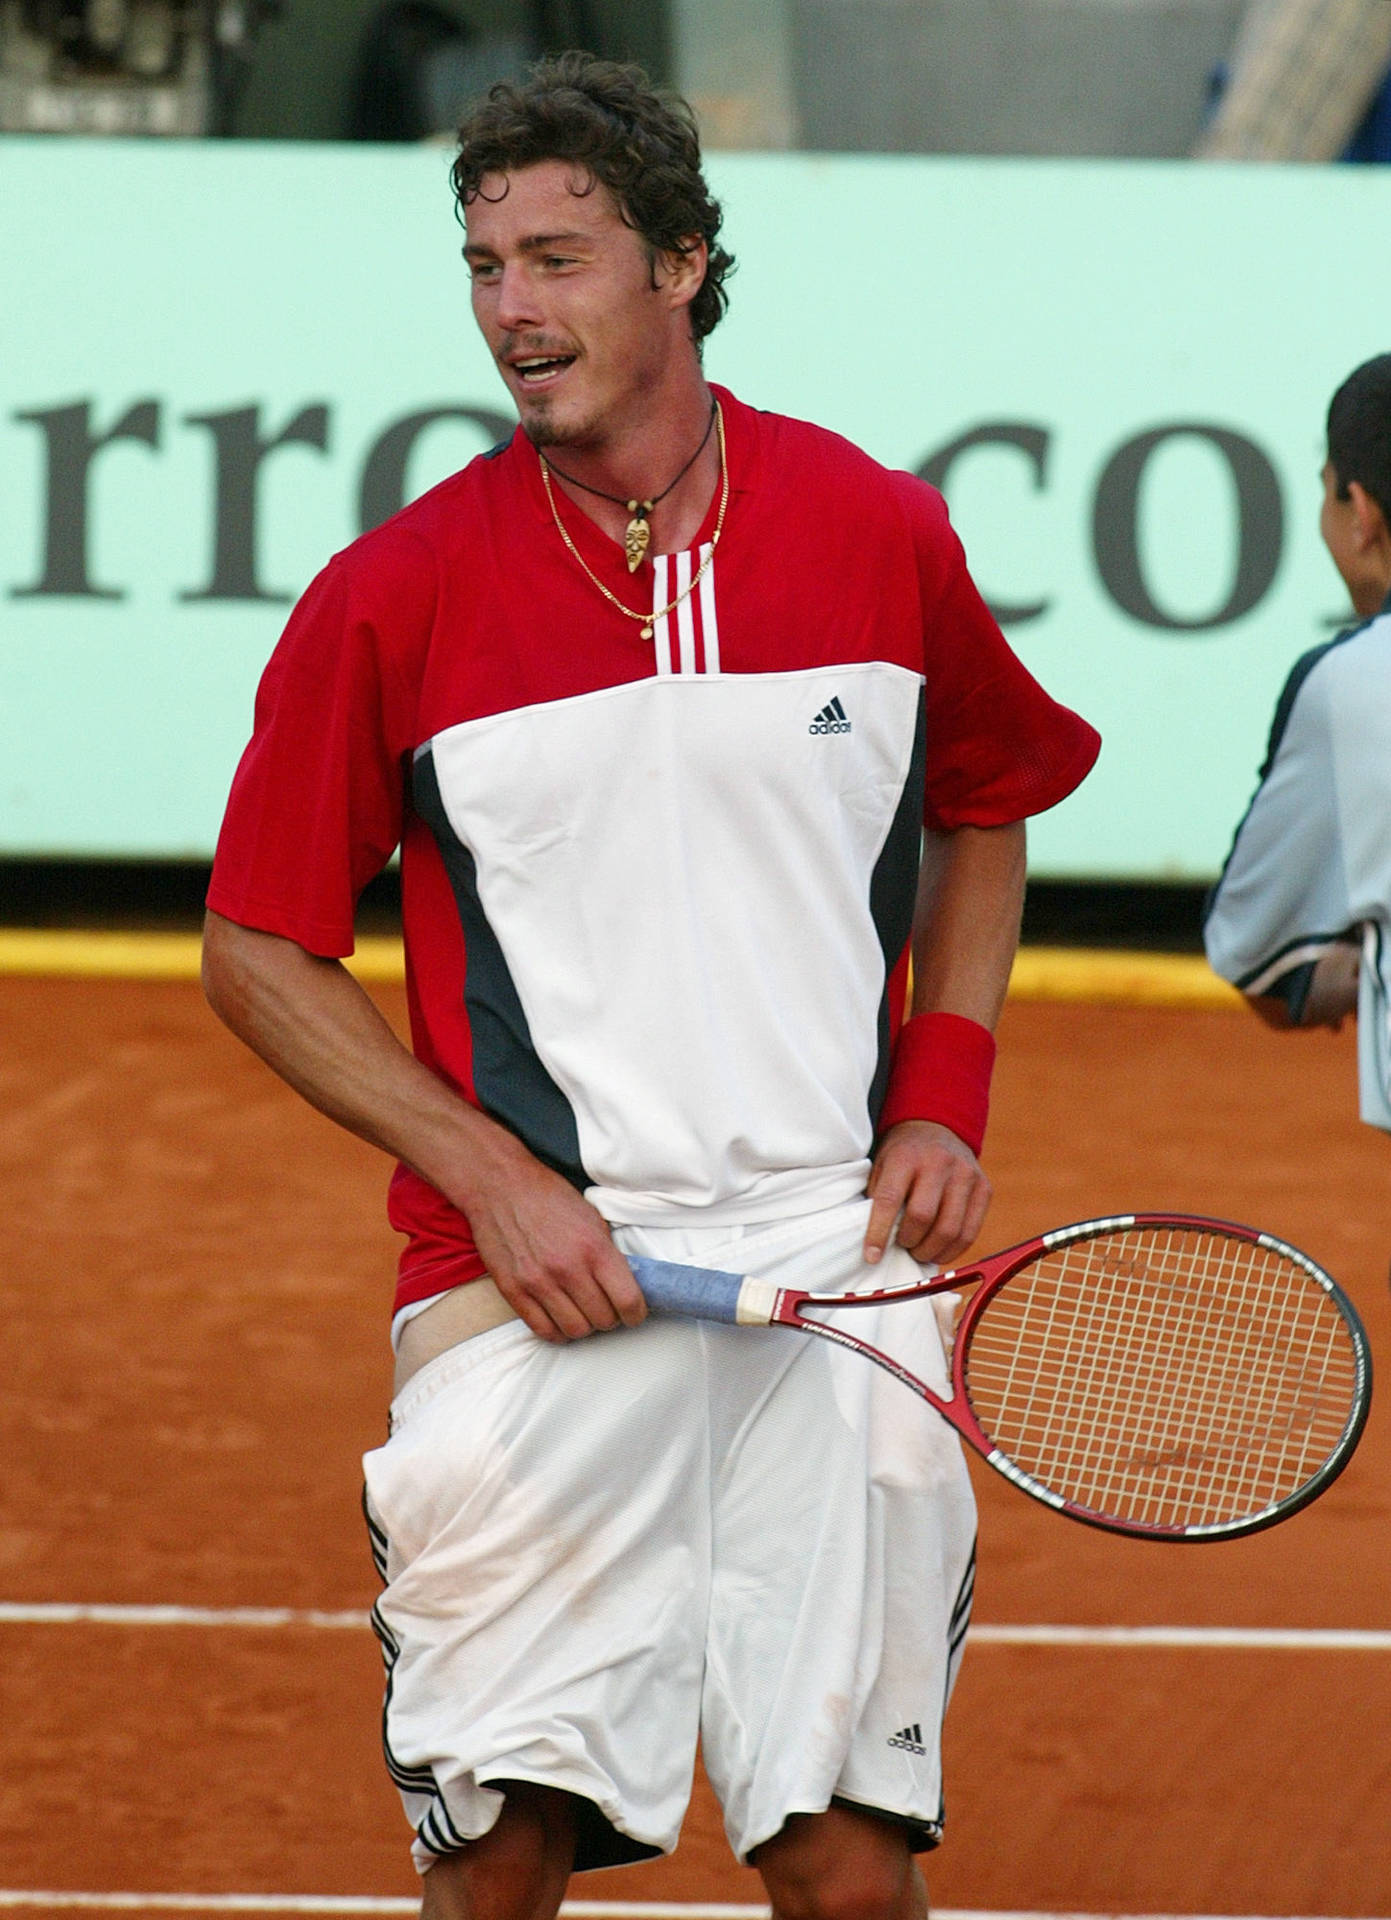 Marat Safin showing prowess at the French Open Tennis Tournament Wallpaper